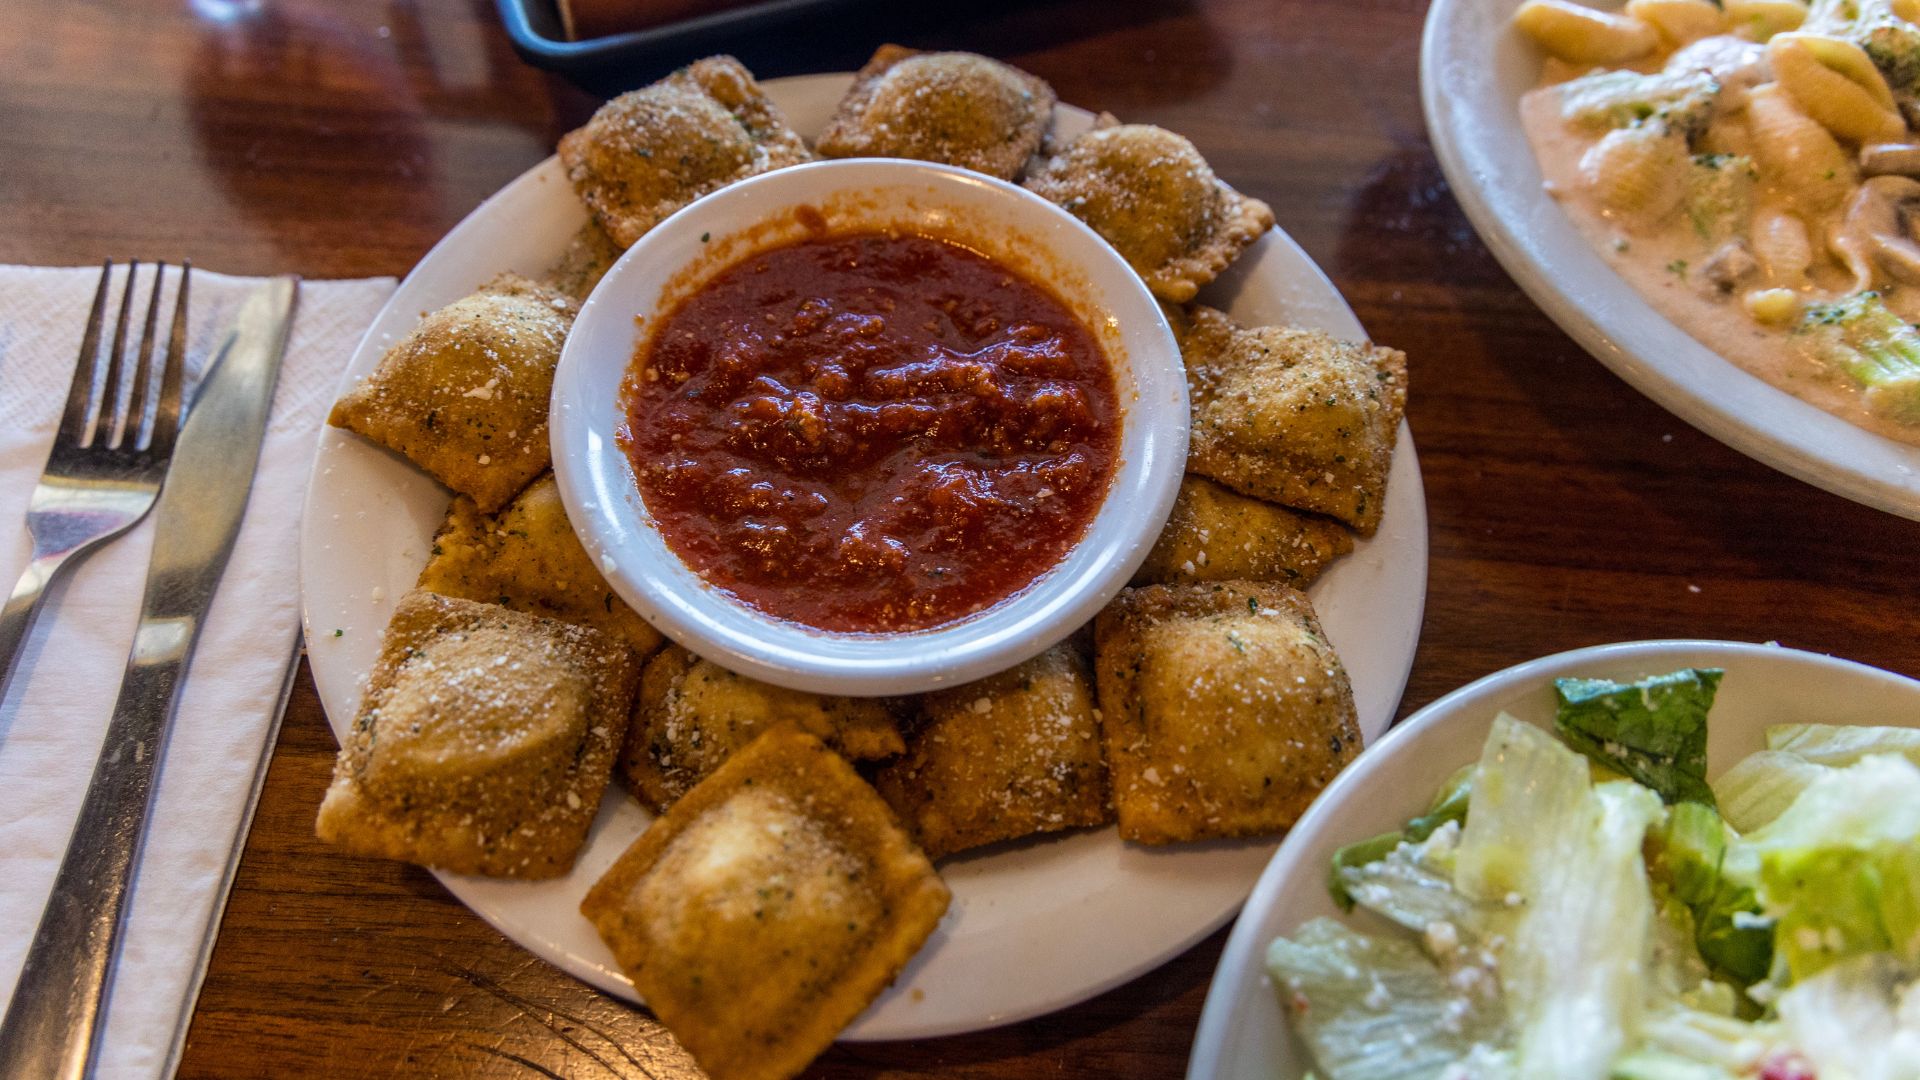 A spread from The Pasta House Co. features toasted ravioli, salad and pasta con broccoli.